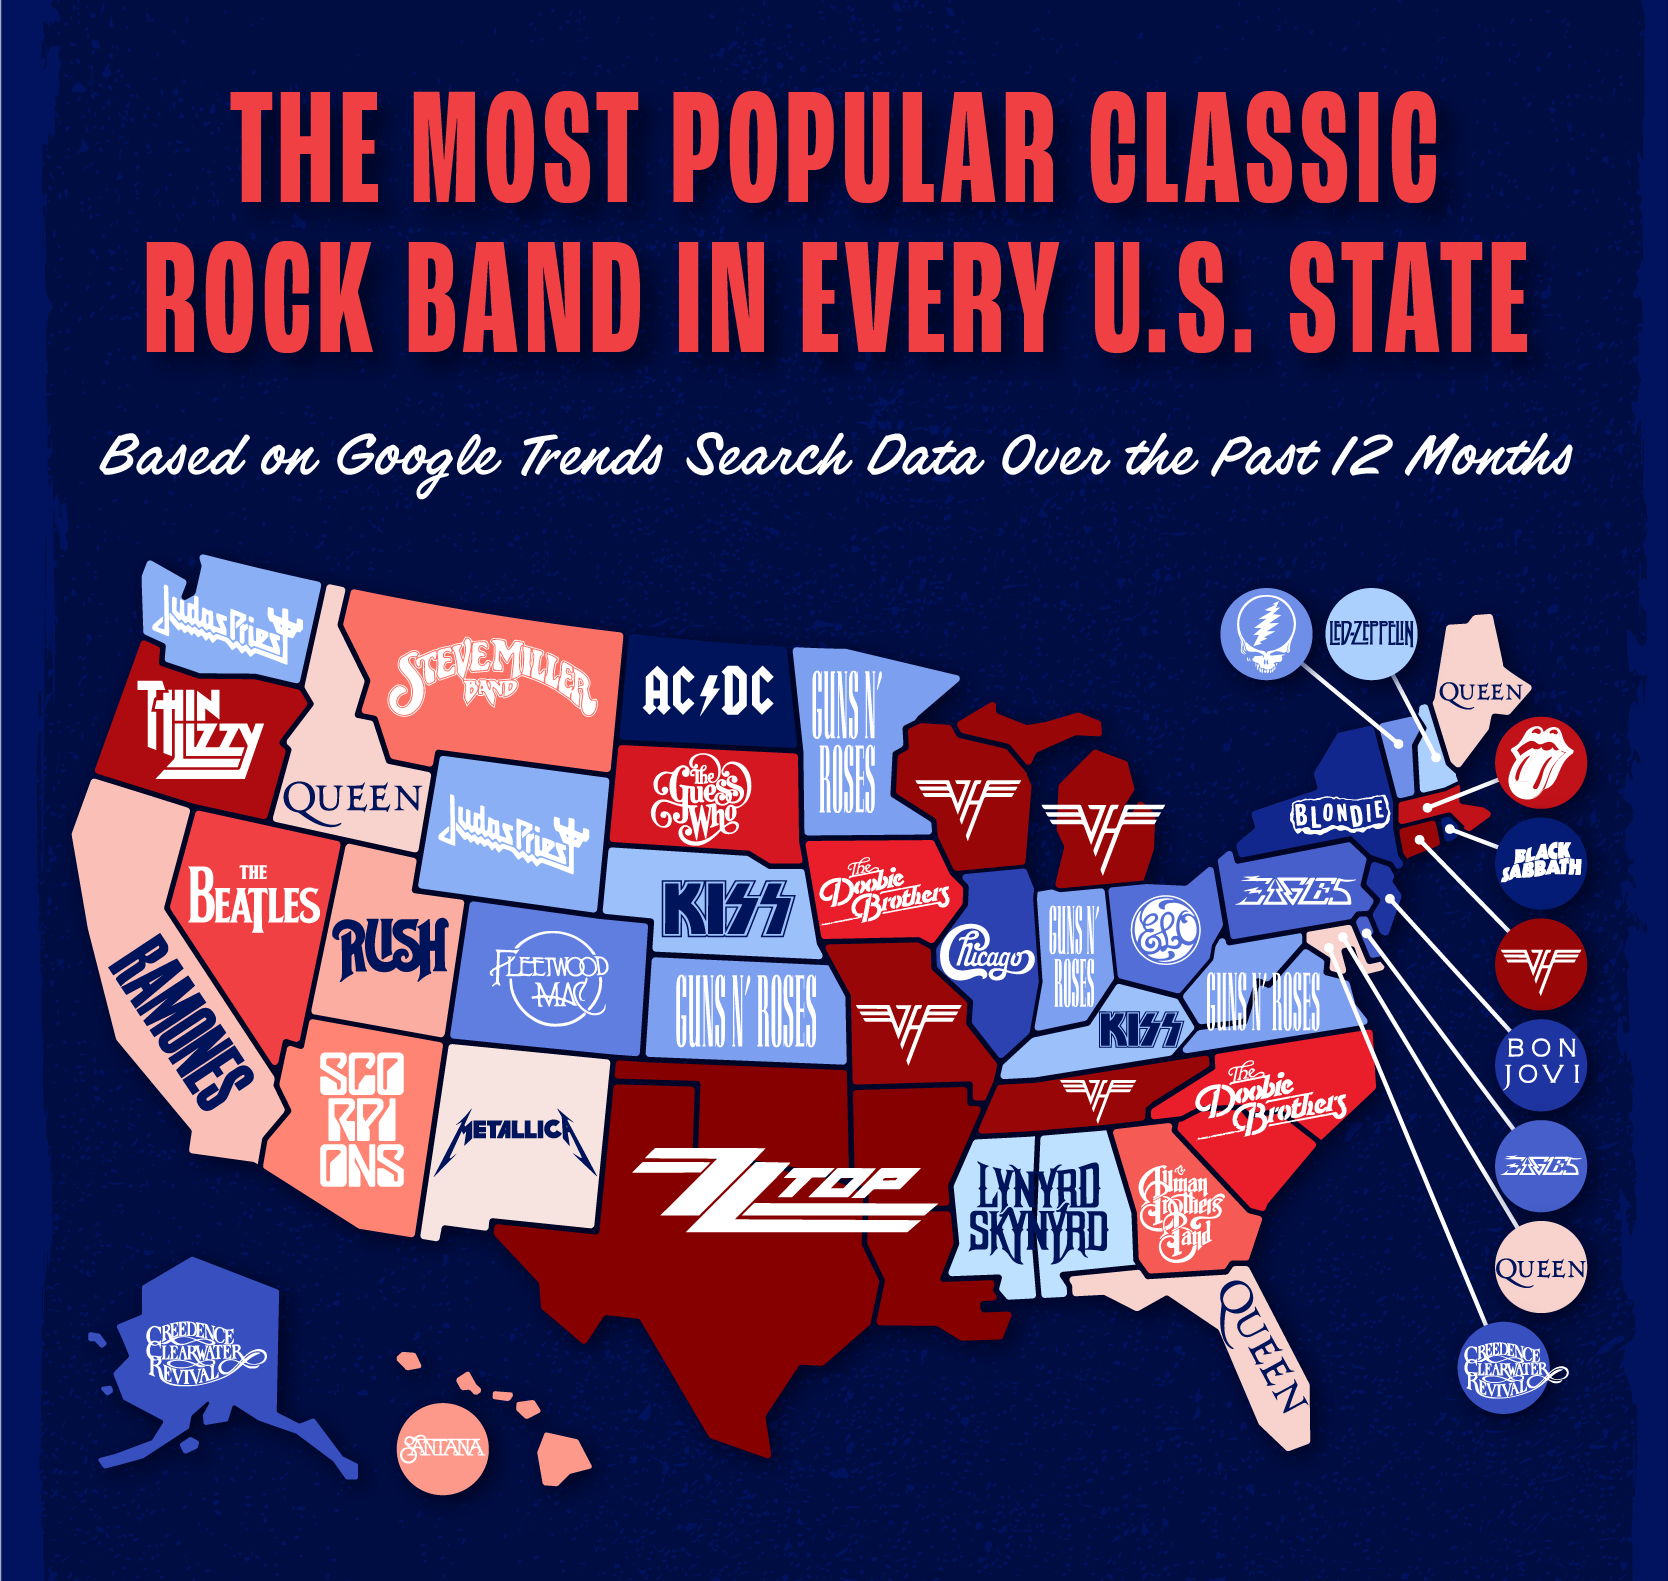 A U.S. map showing the most popular classic rock band in every state